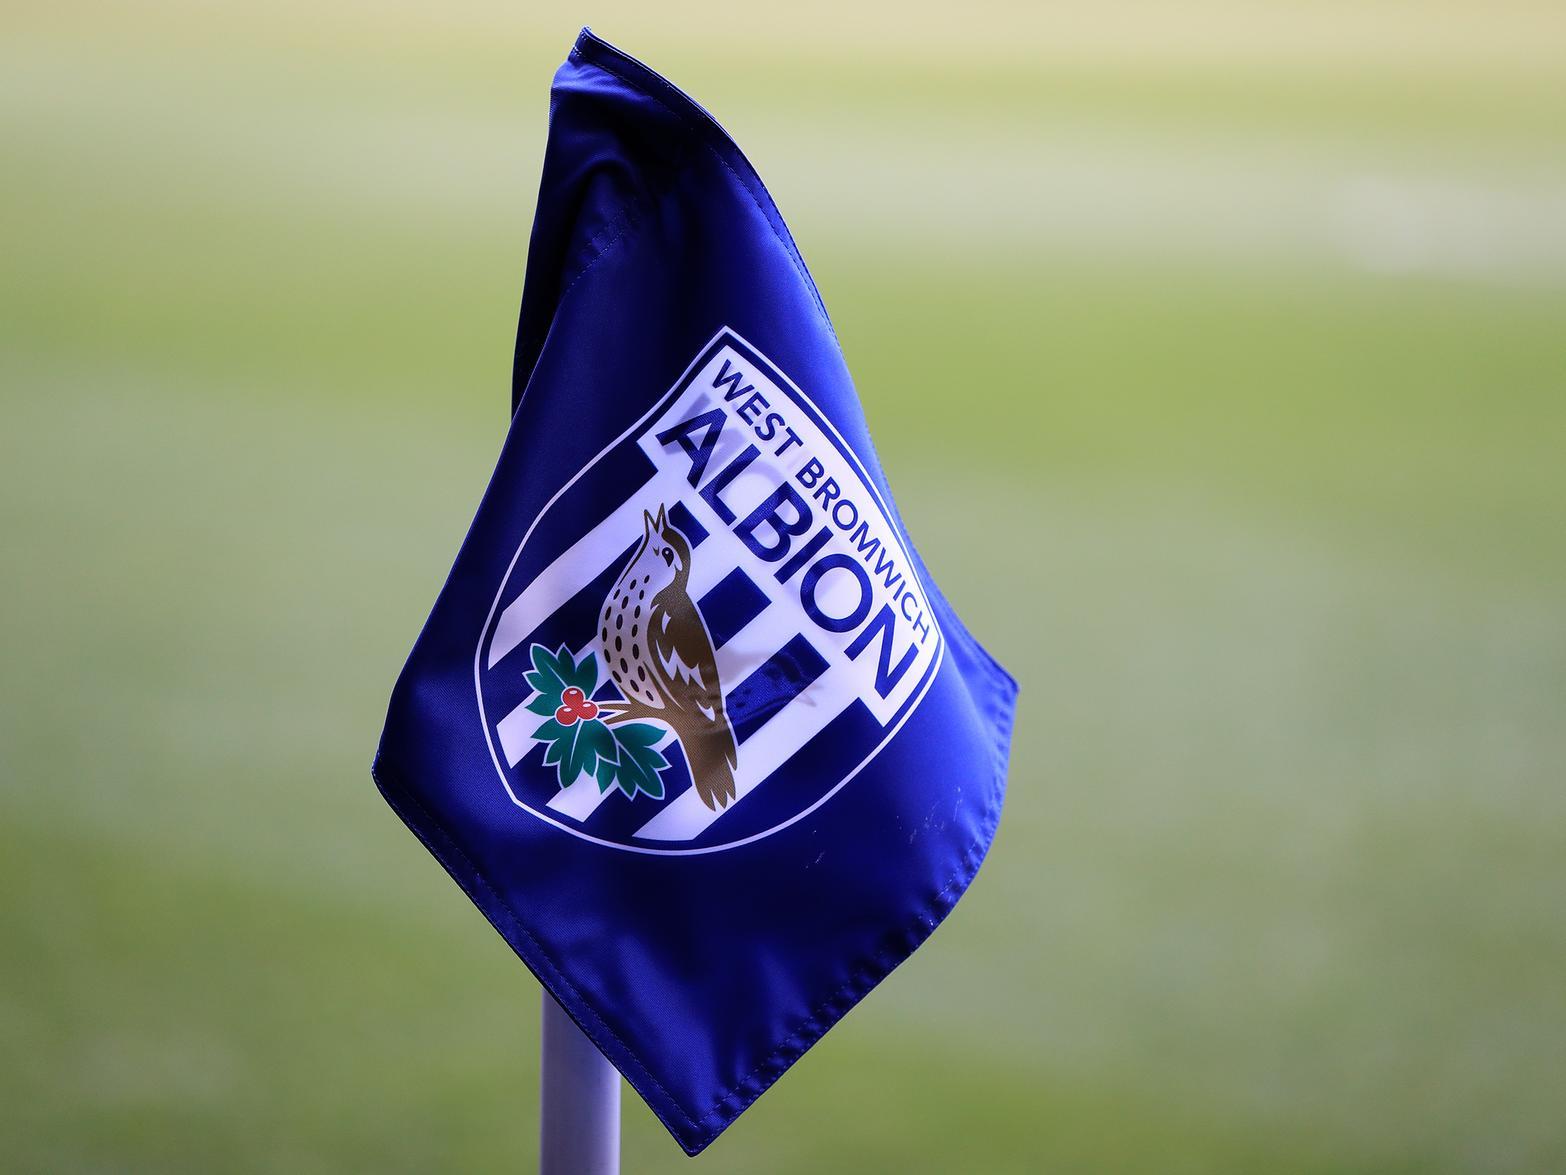 Paris Saint-Germain are the latest side to be linked with West Bromwich Albion wonderkid Jovan Malcolm, who is also being monitored by Premier League side Arsenal. (Birmingham Mail)